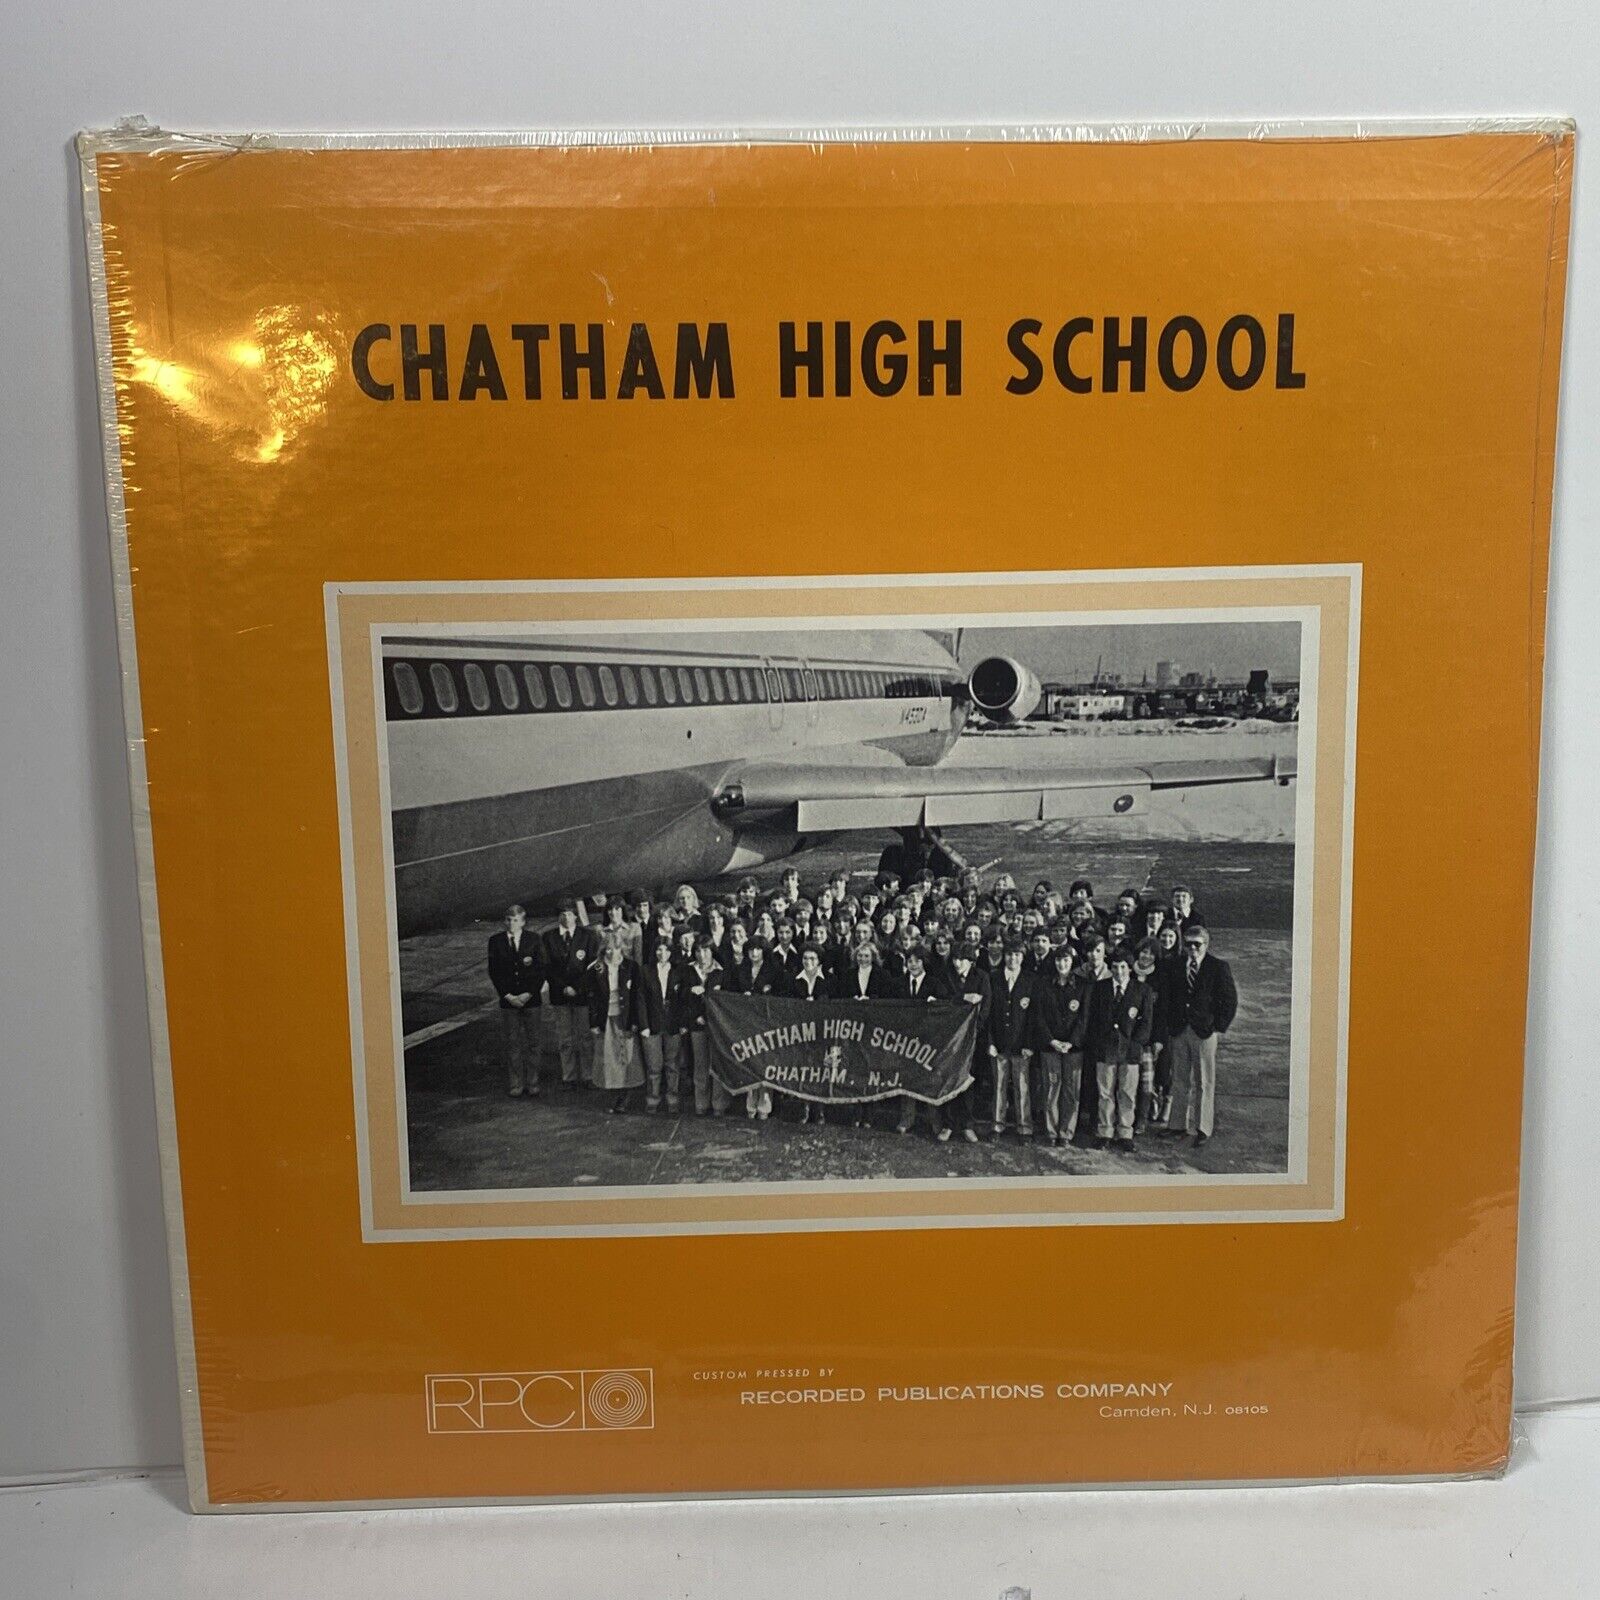 1979 Chatham High School Record - Chatham, New Jersey Music Department LP